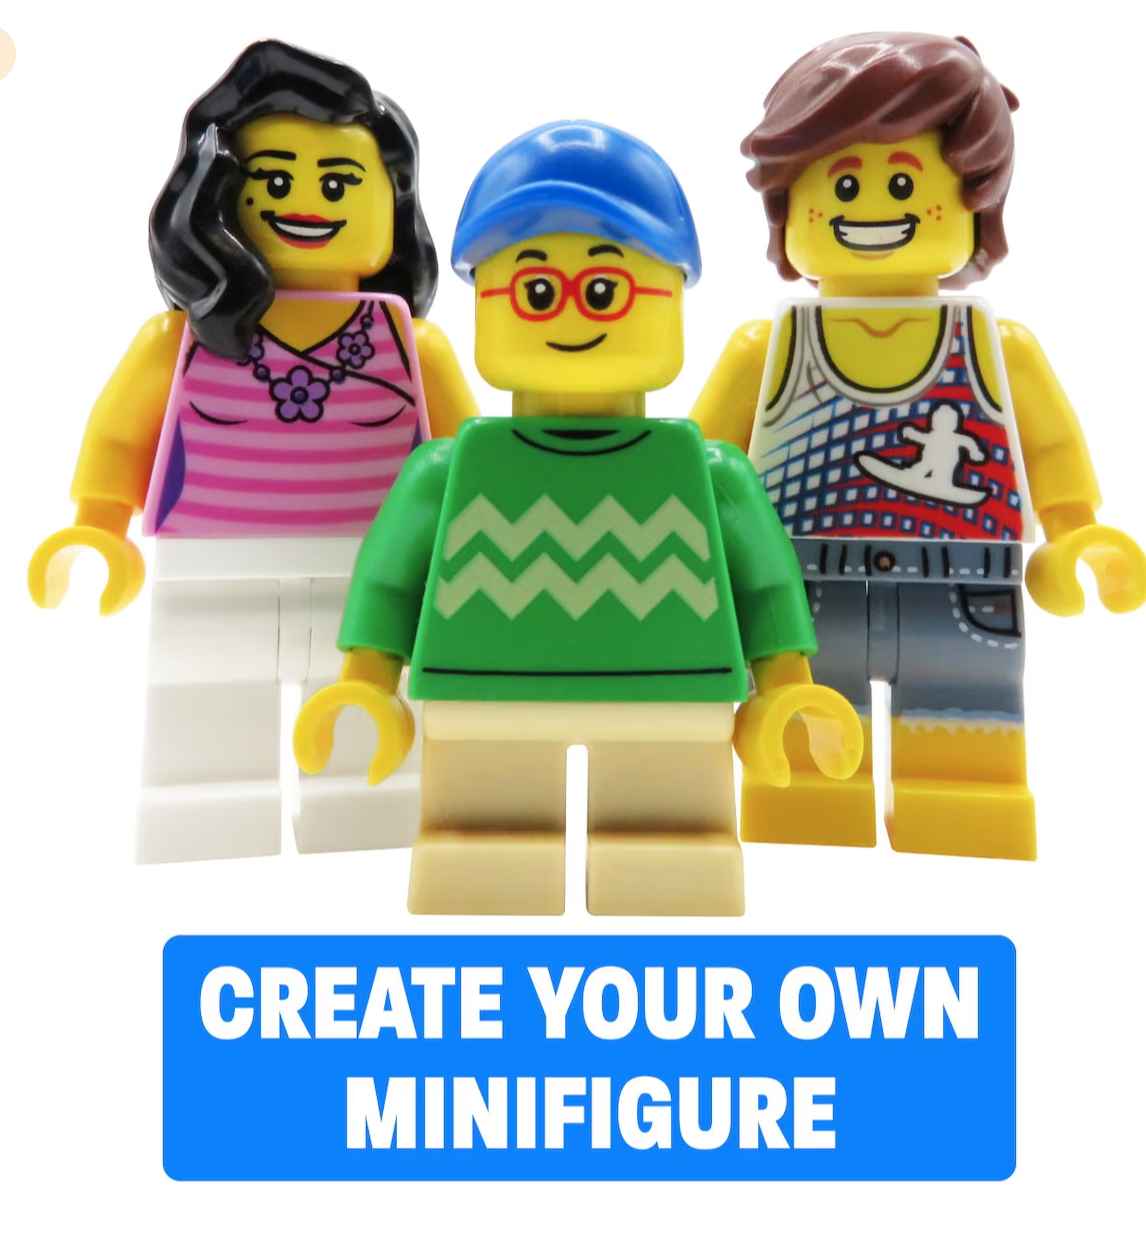 For the LEGO enthusiasts in your life, personalized fun awaits with Customized Mini Figs. These custom LEGO minifigures can be designed to resemble your child's favorite characters, making playtime even more exciting. Unleash their building skills and let their imagination run wild.